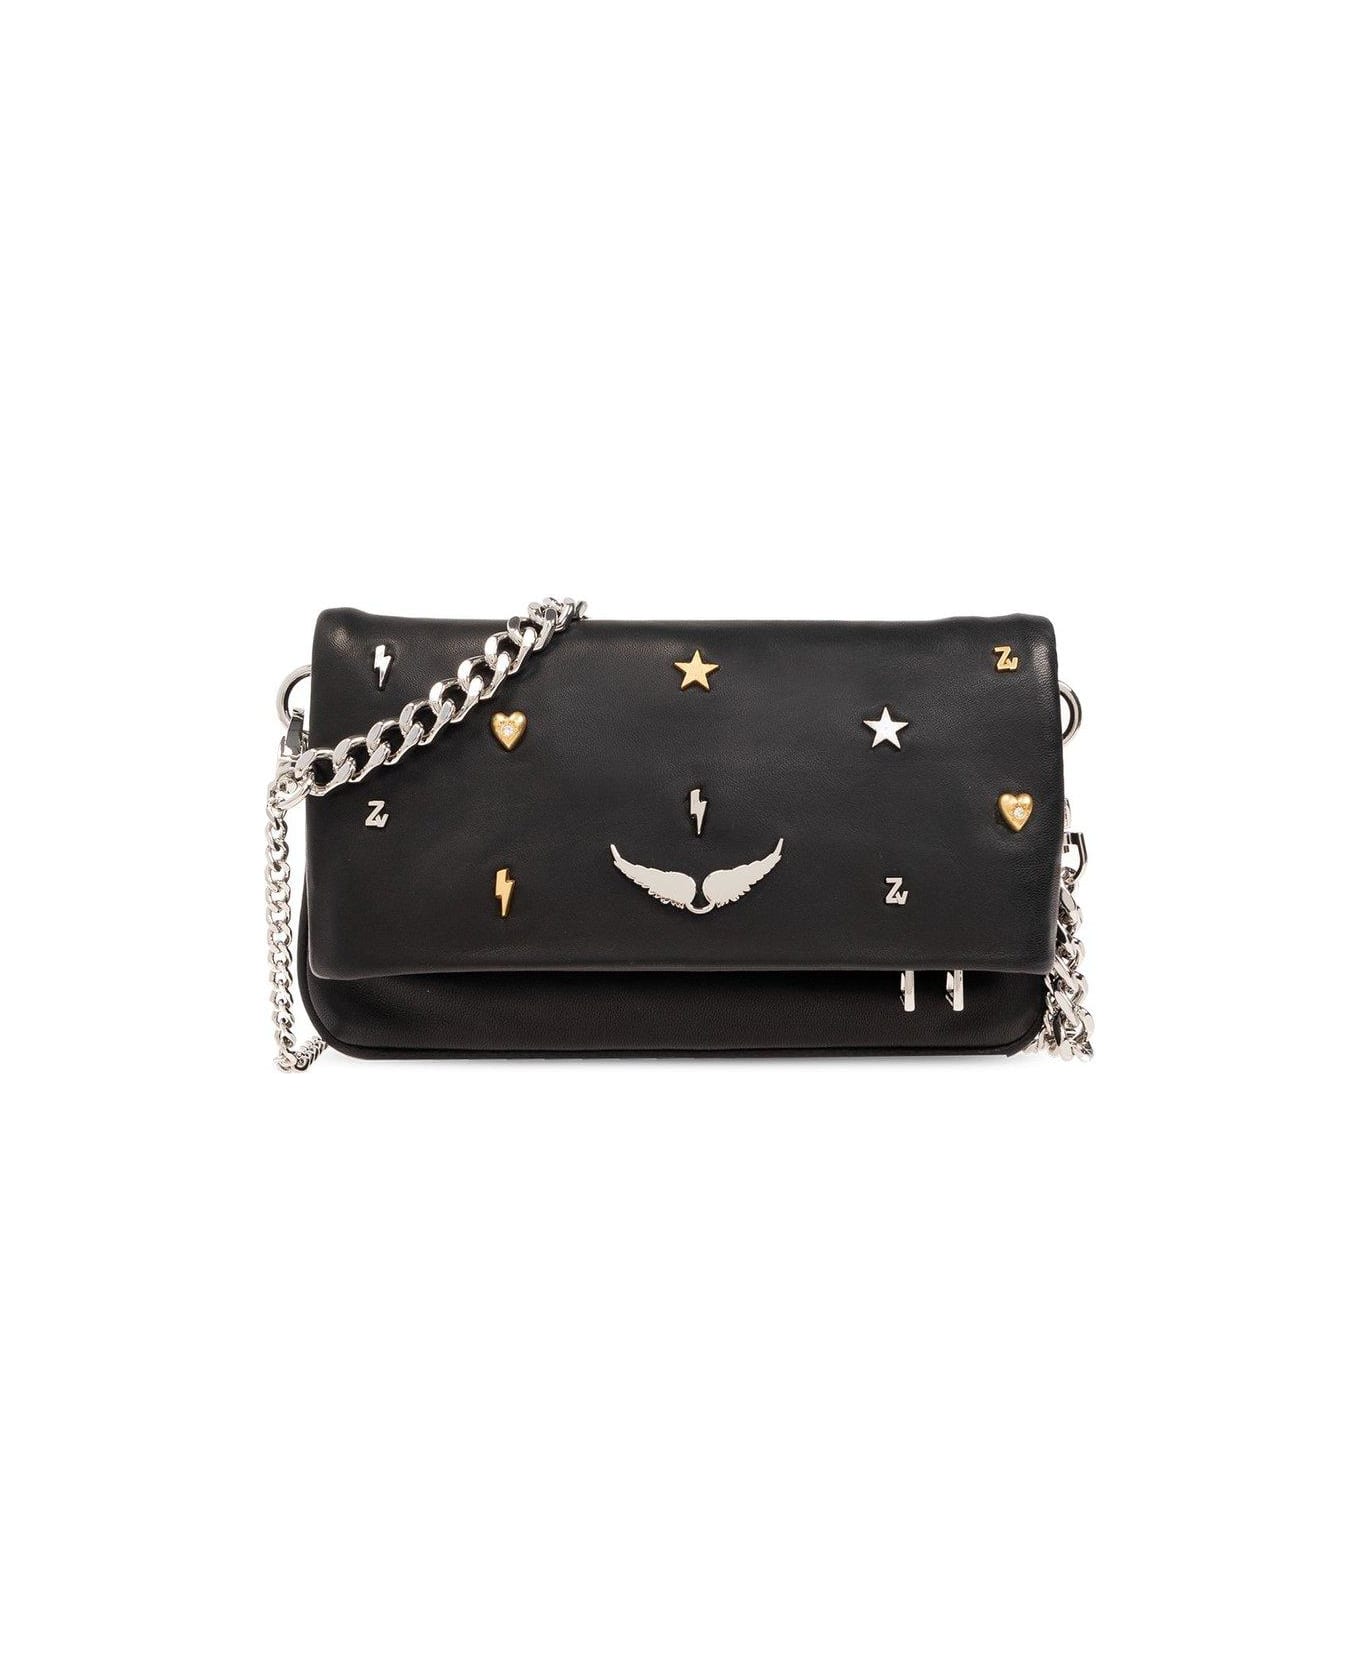 Zadig & Voltaire Rock Nano Lucky Charms Clutch Bag - Black ショルダーバッグ